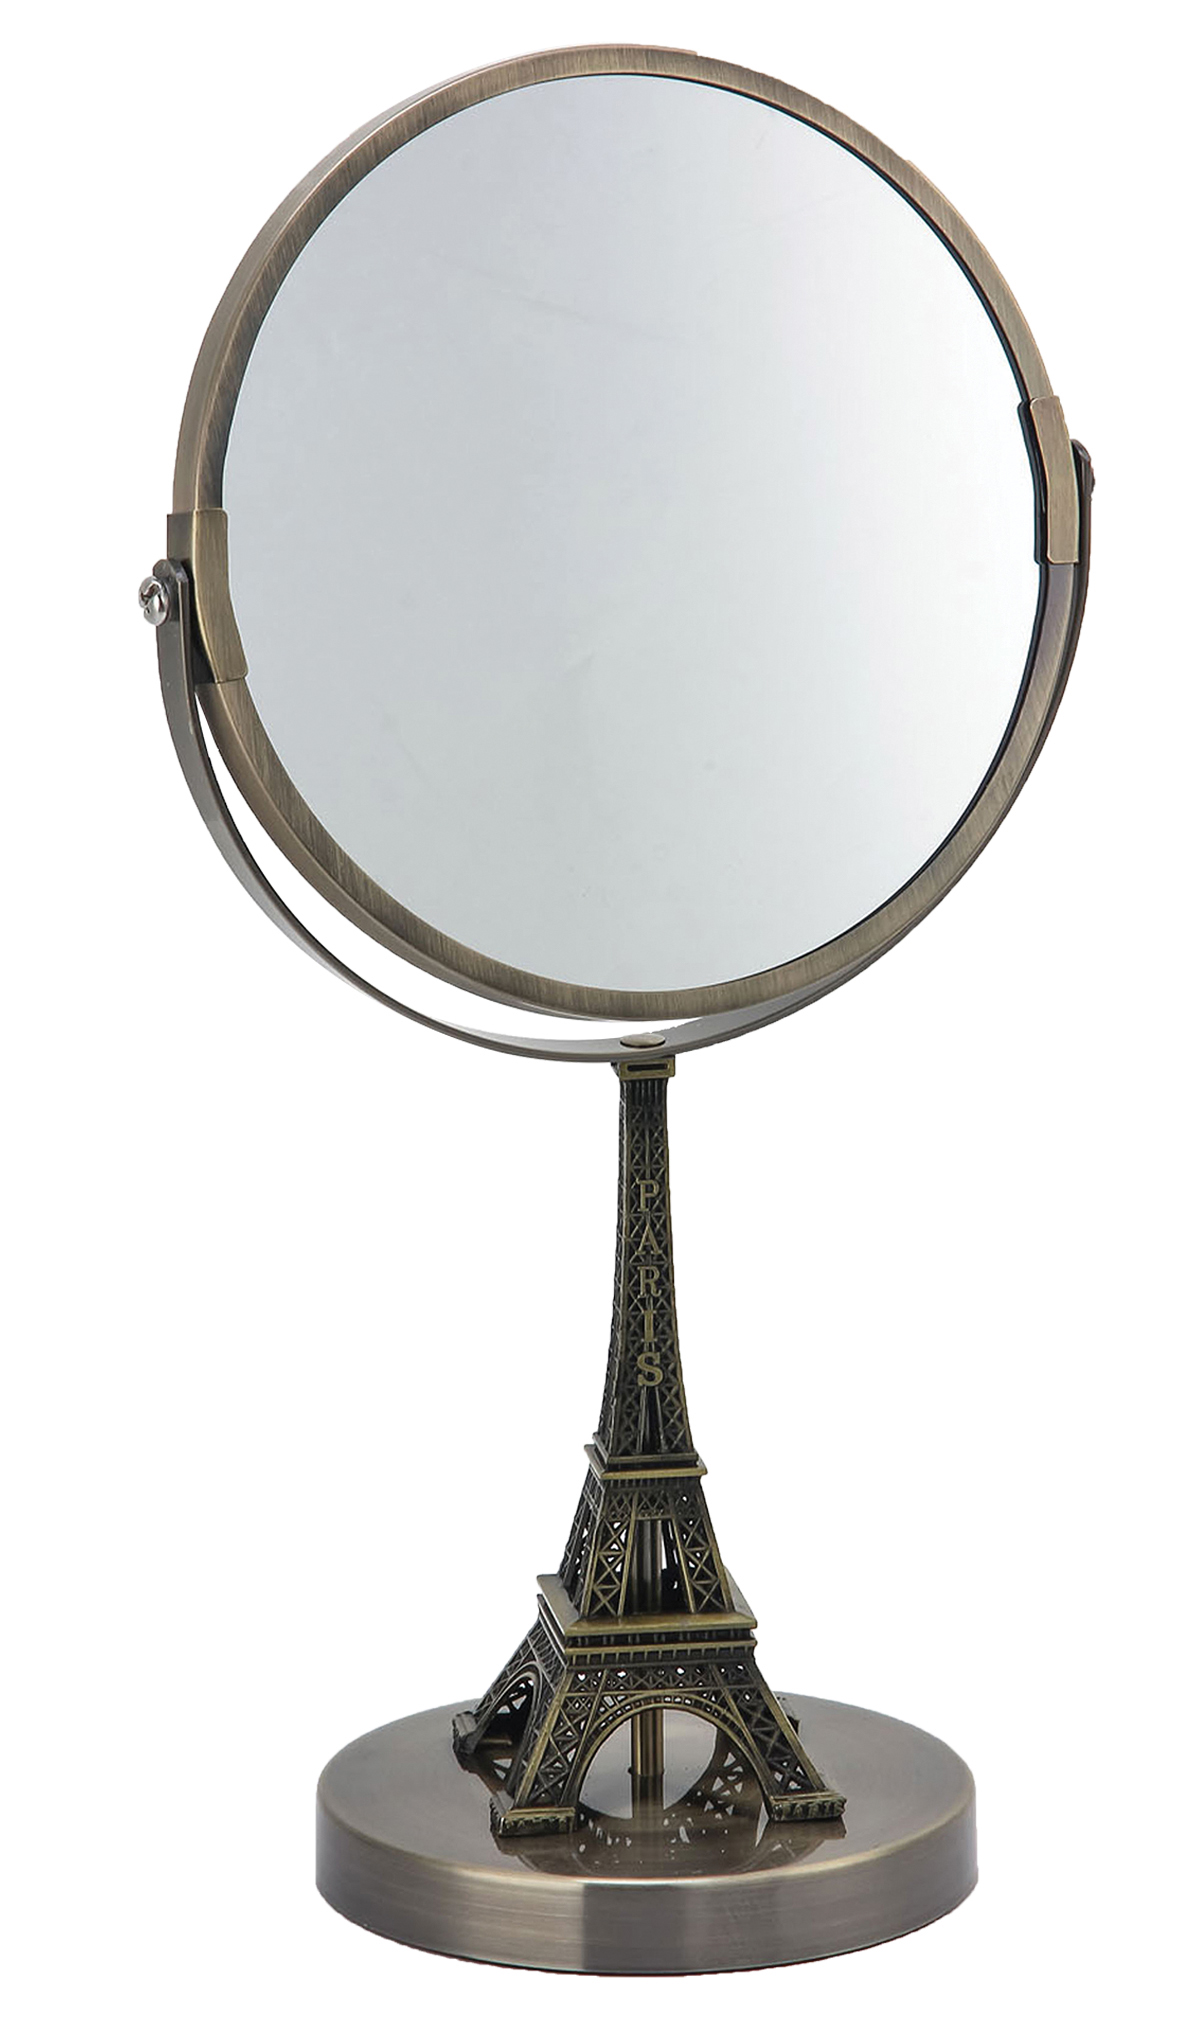 ELLE The Parisians Lifestyle Collection Eiffel Tower Embroidered Vanity MIRRORs